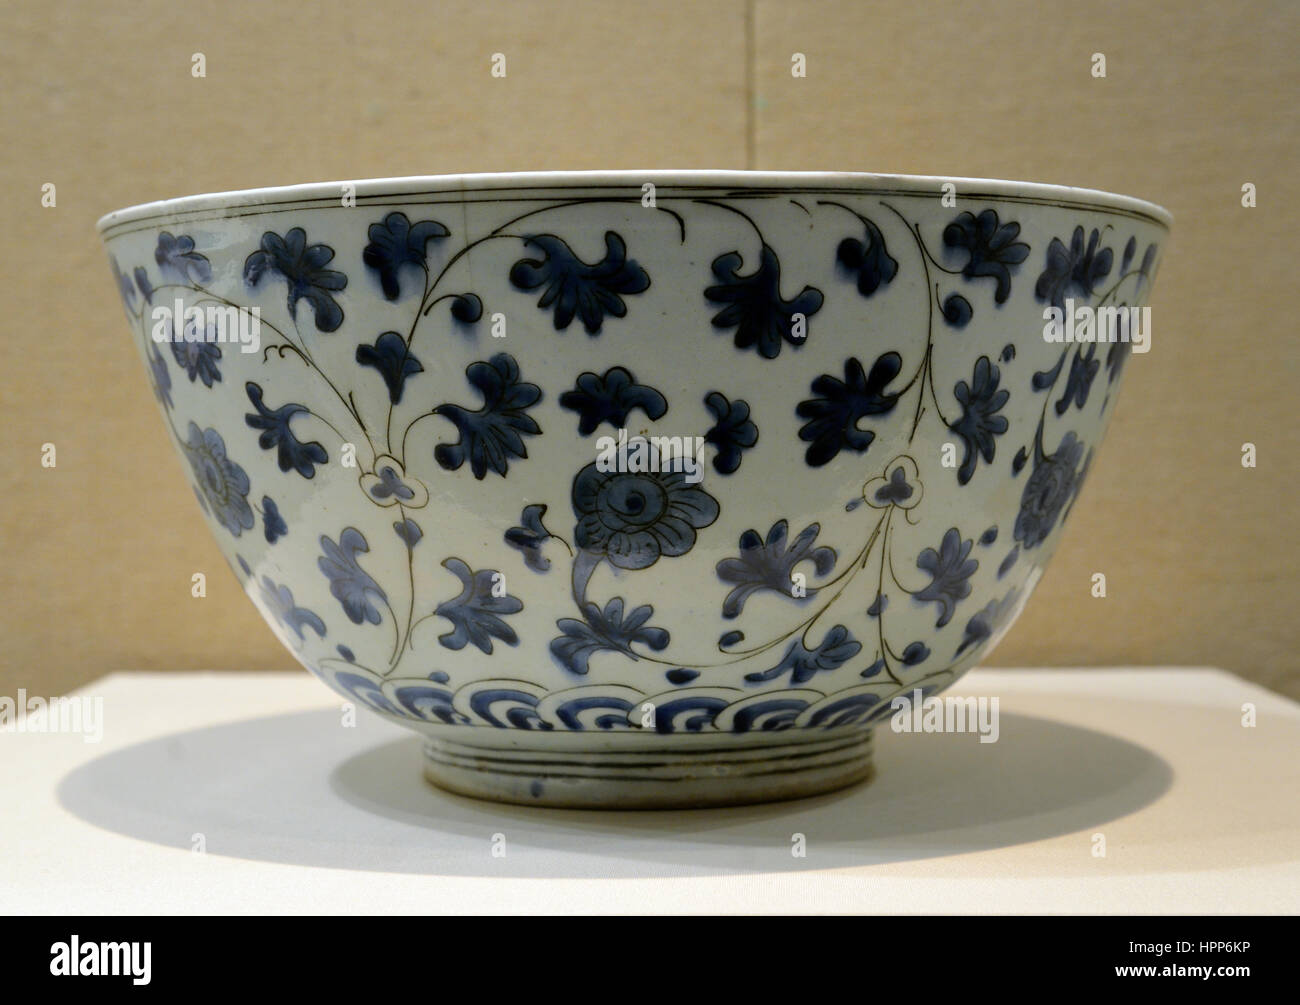 Grand porcelain bowl with crane pattern in Louvre. Made in Iran, 17th century. Stock Photo